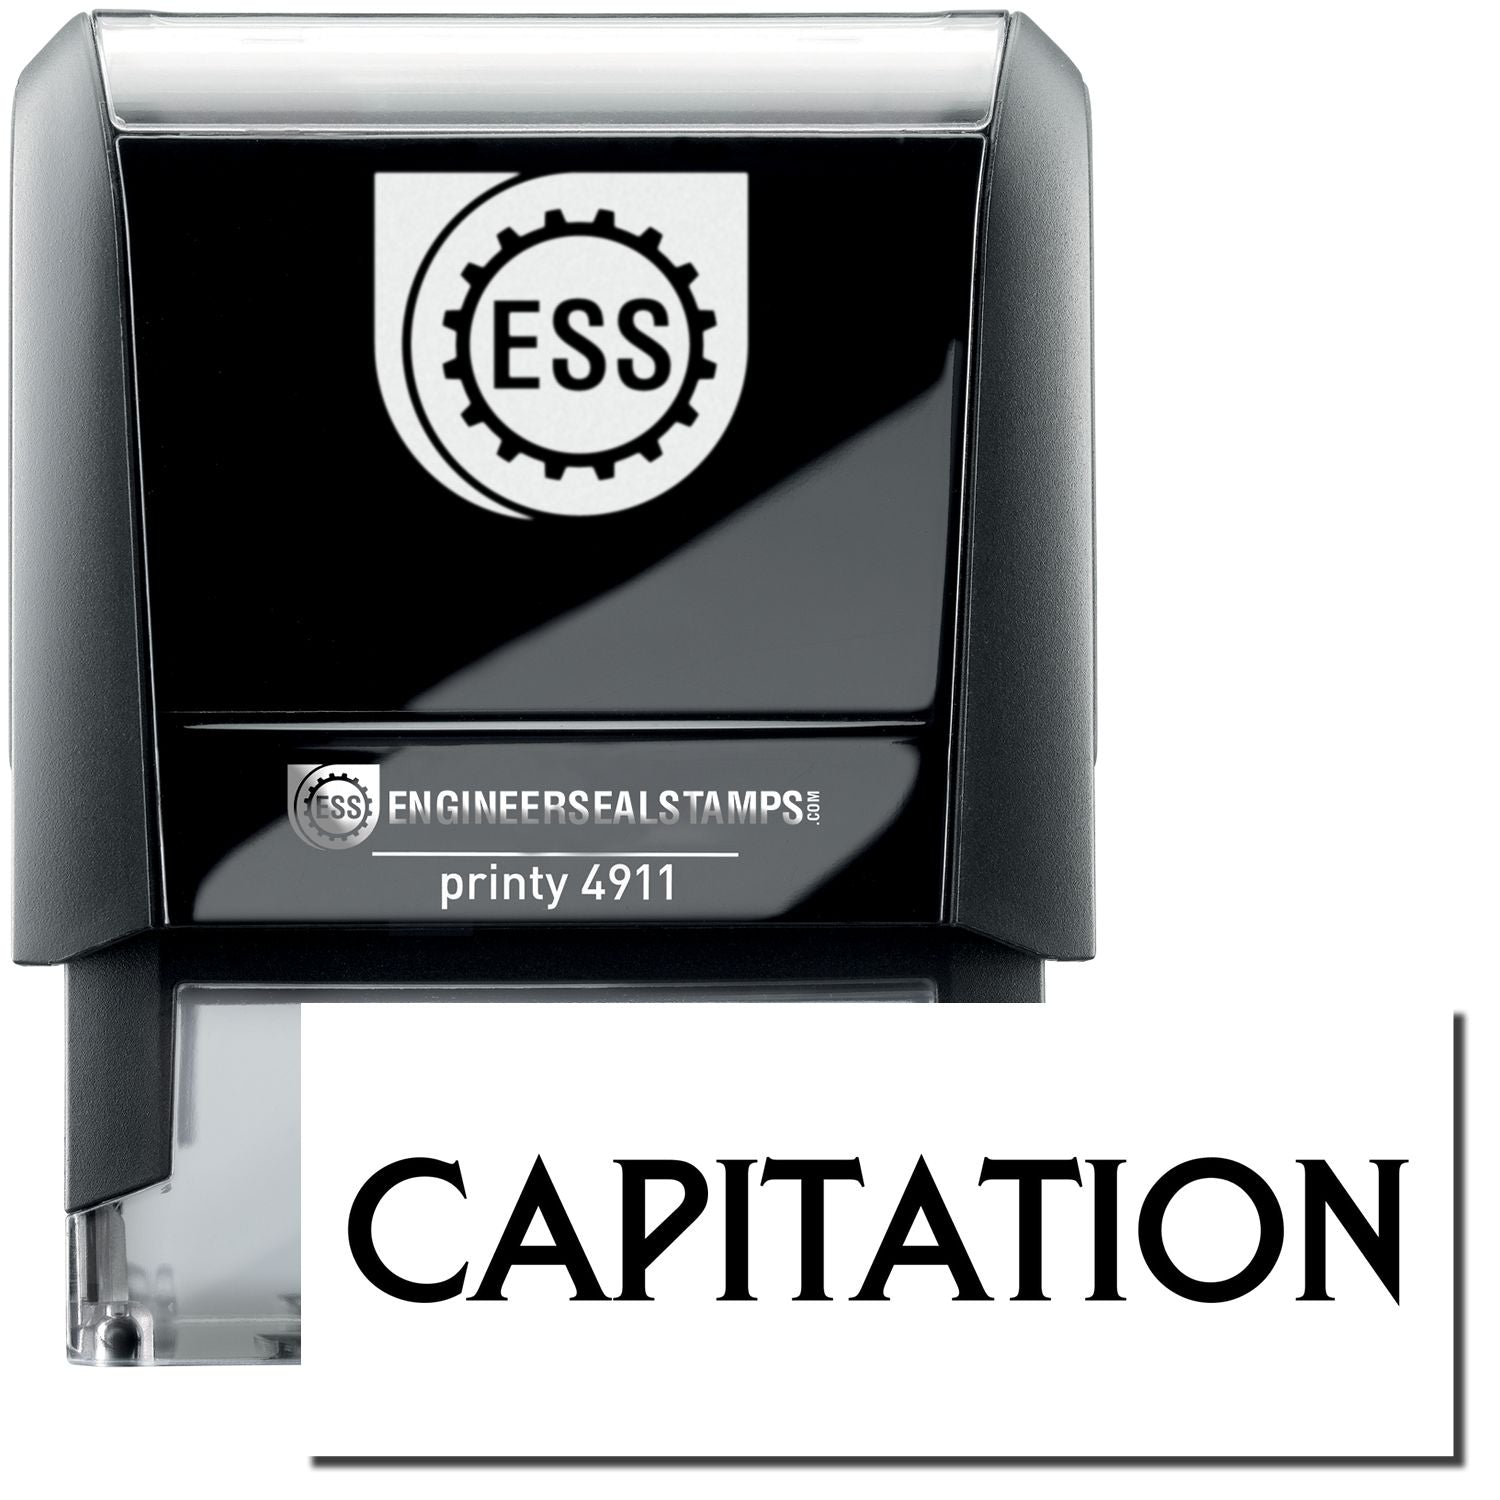 A self-inking stamp with a stamped image showing how the text "CAPITATION" is displayed after stamping.